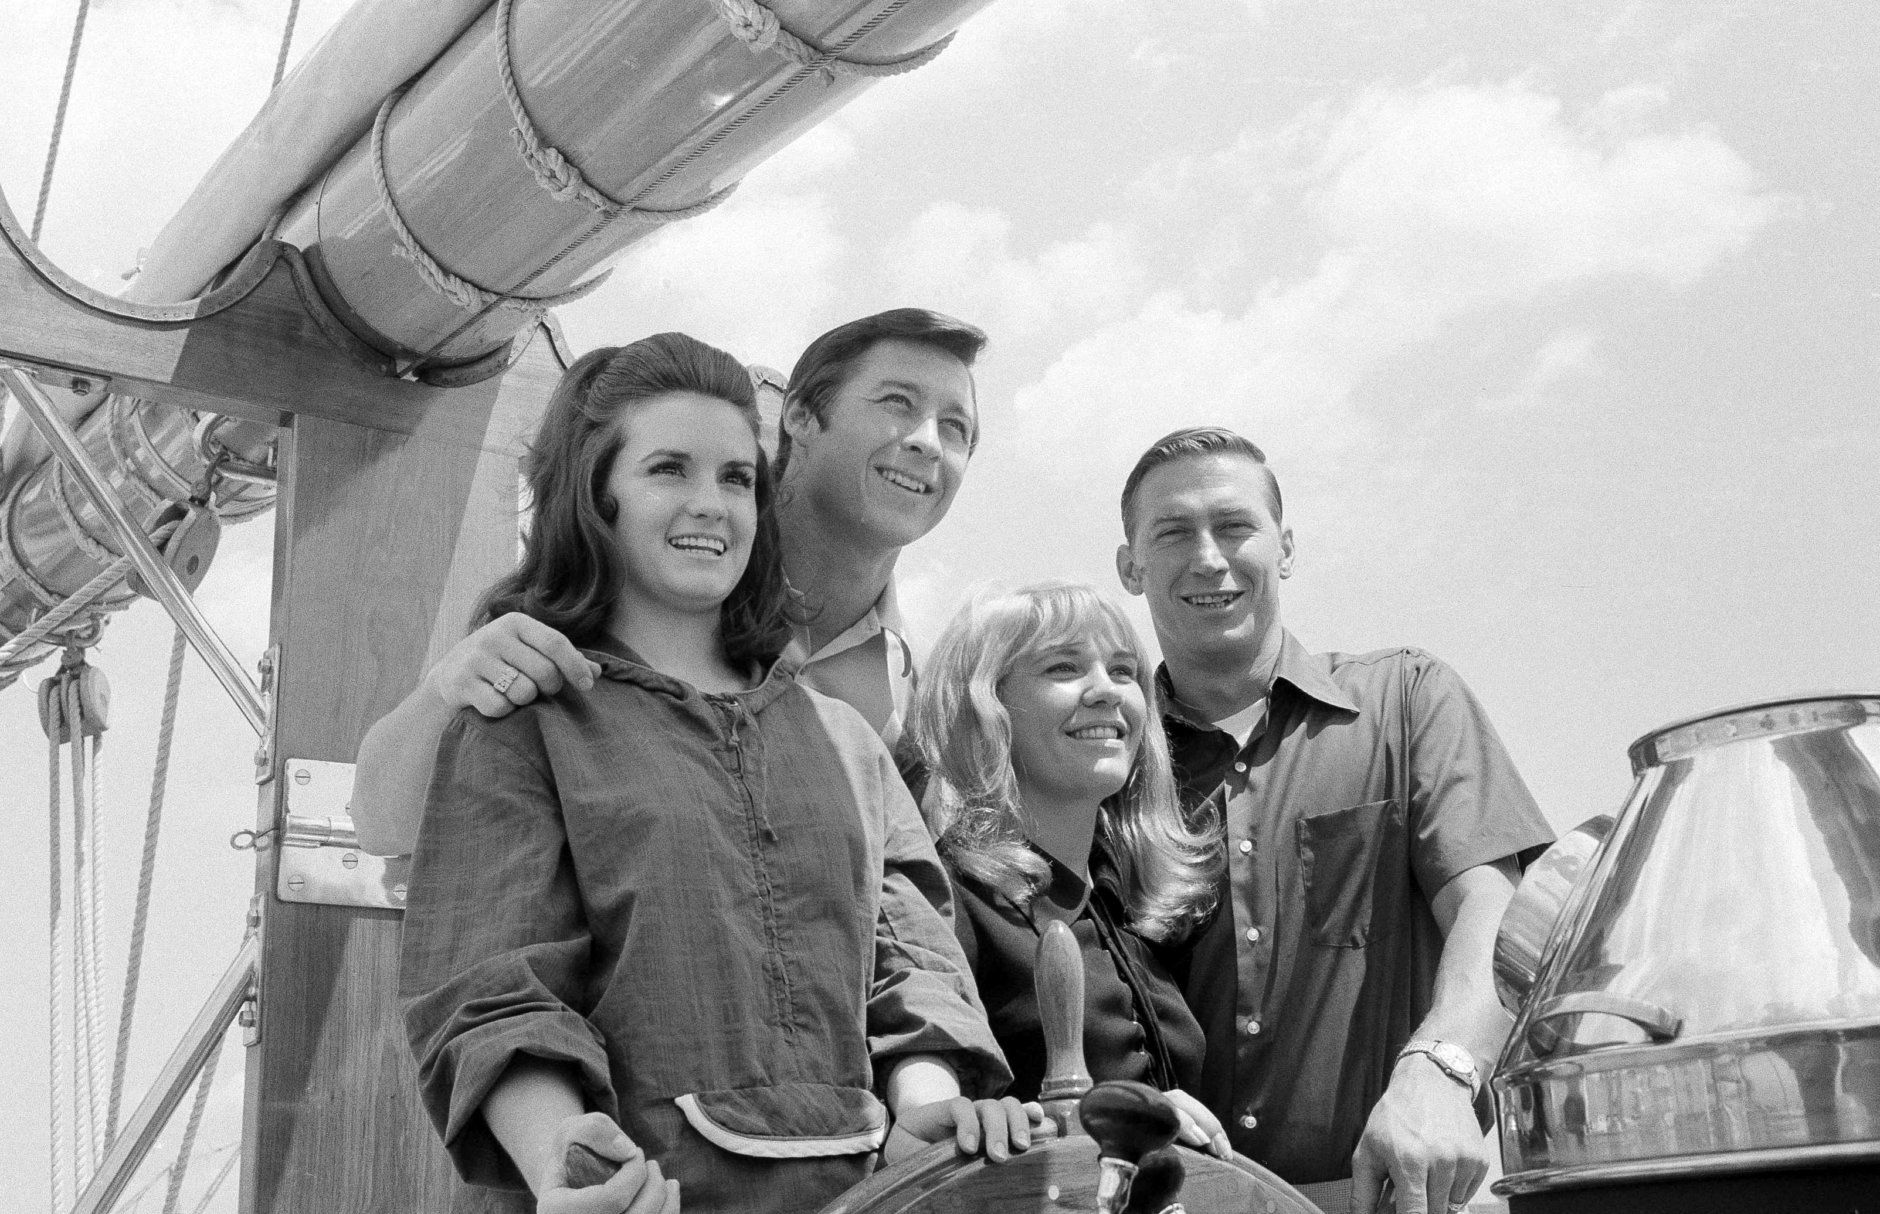 New York Yankees' Bobby Murcer and Mel Stottlemyre, right, pose with their wives Jean Stottlemyre and Kay Murcer  at the wheel of the schooner America during cruise on Long Island Sound, July 6, 1970. The vessel is a replica of the original America, which captured the first Americas Cup in 1851. (AP Photo/Harry Harris)